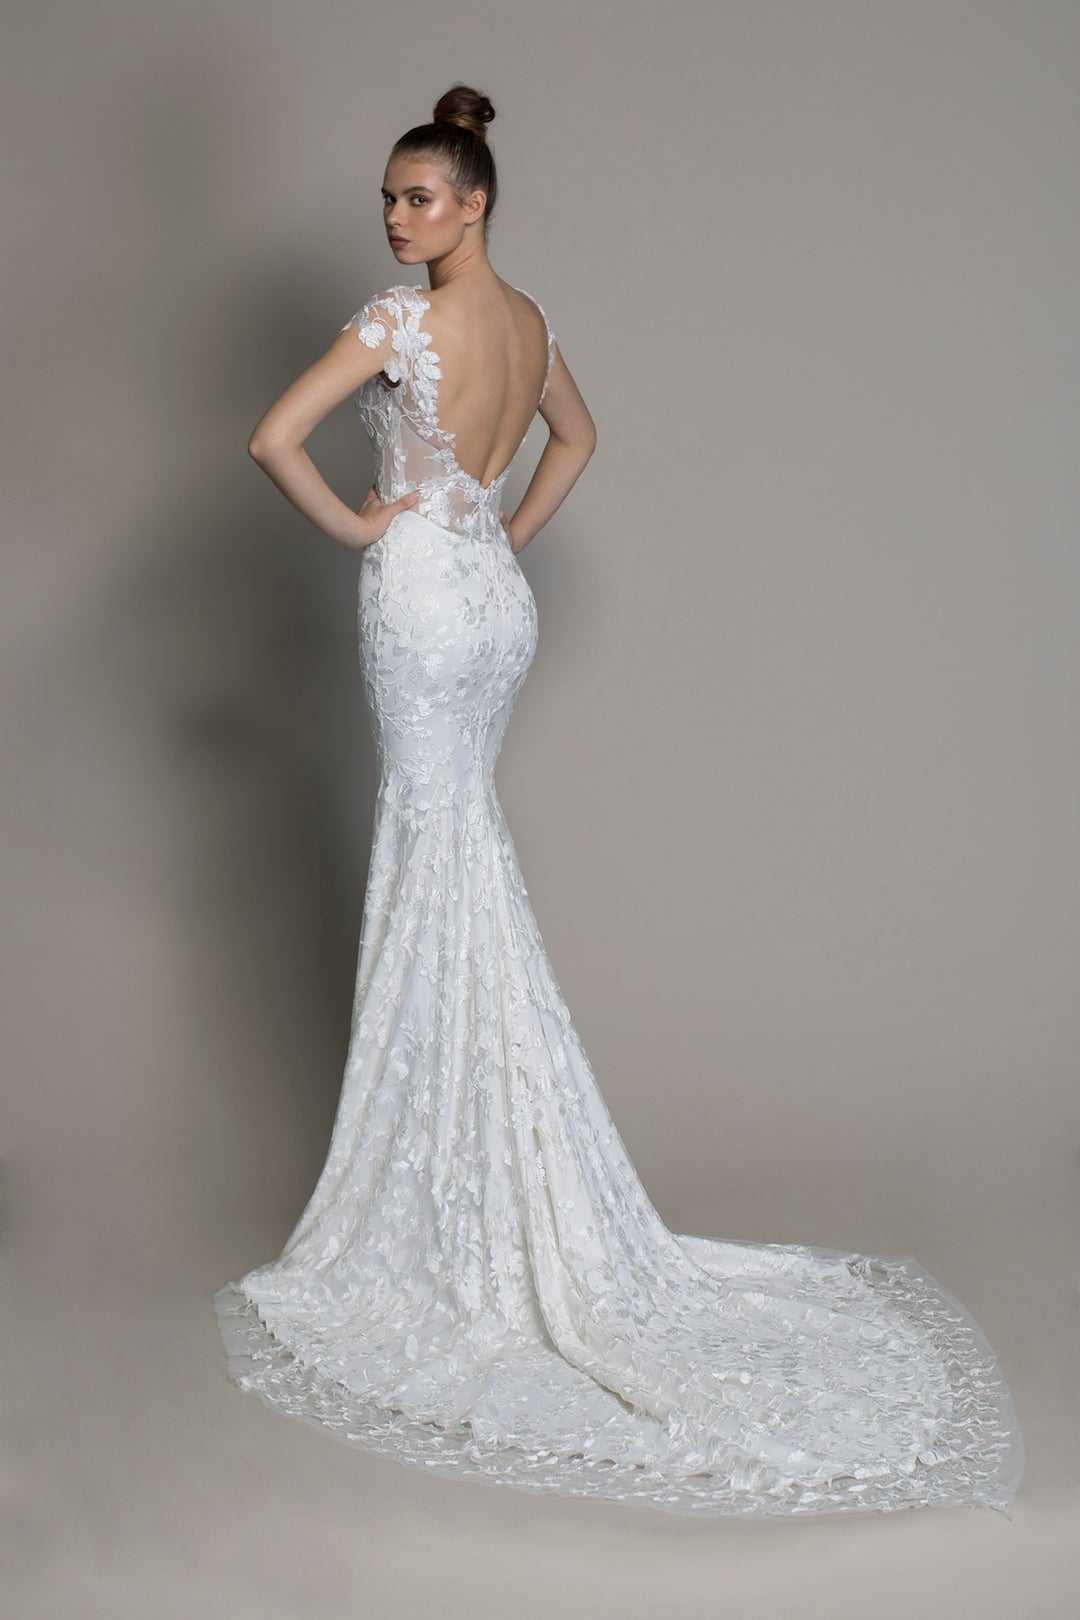 Pnina Tornai's new LOVE 2020 Collection is out! This is style 14763